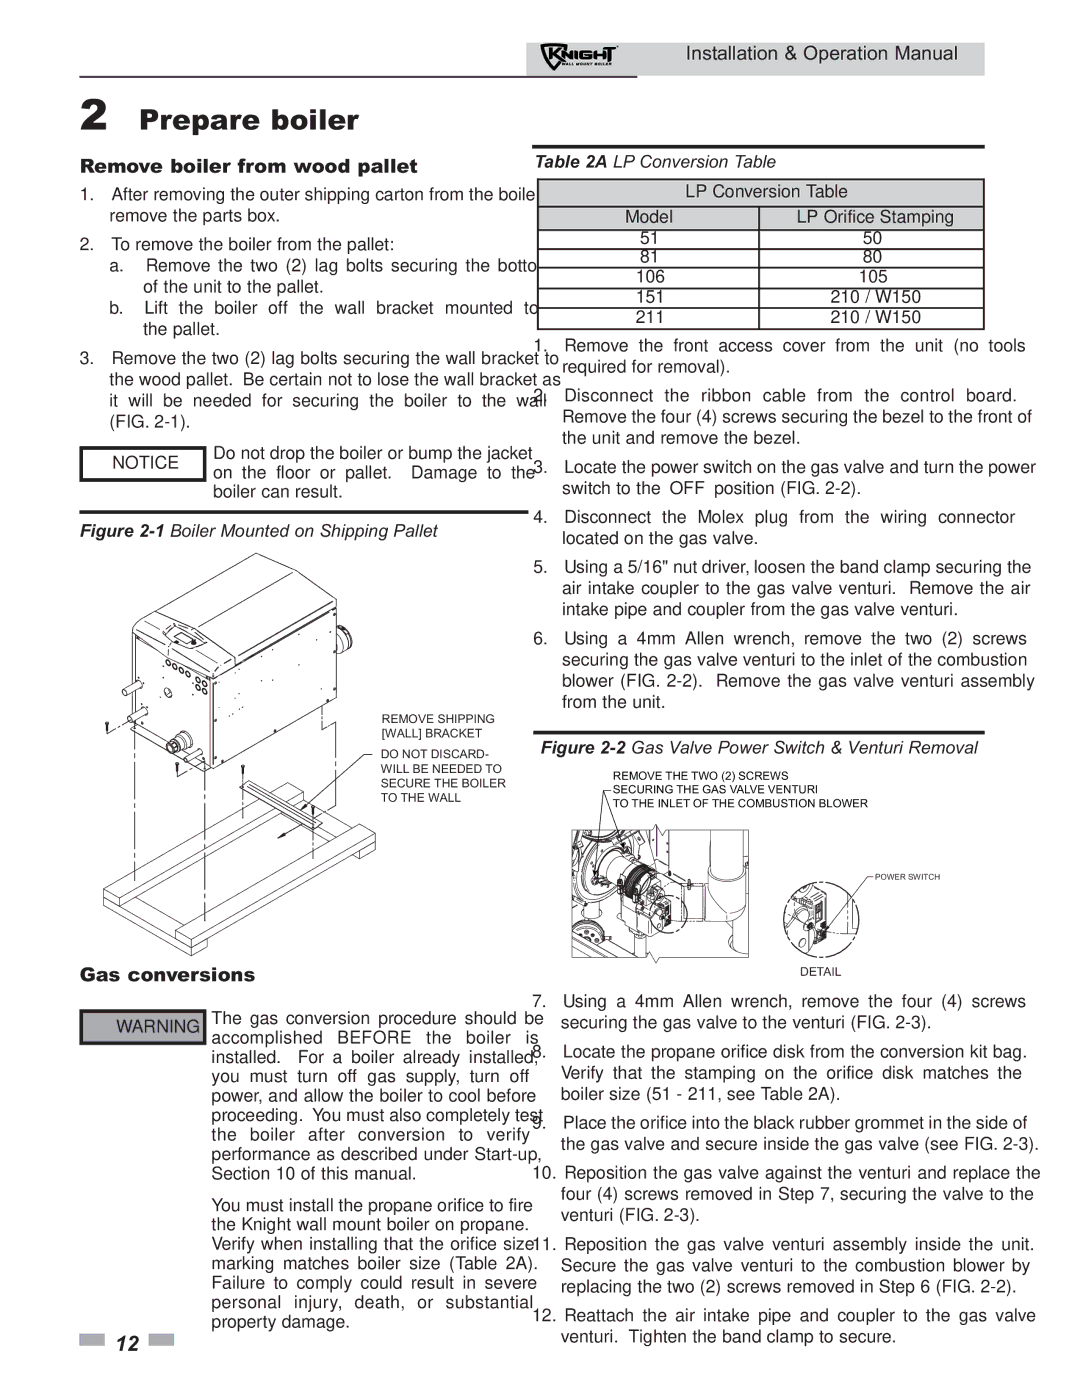 Lochinvar 51 operation manual Prepare boiler, Remove boiler from wood pallet, Gas conversions 